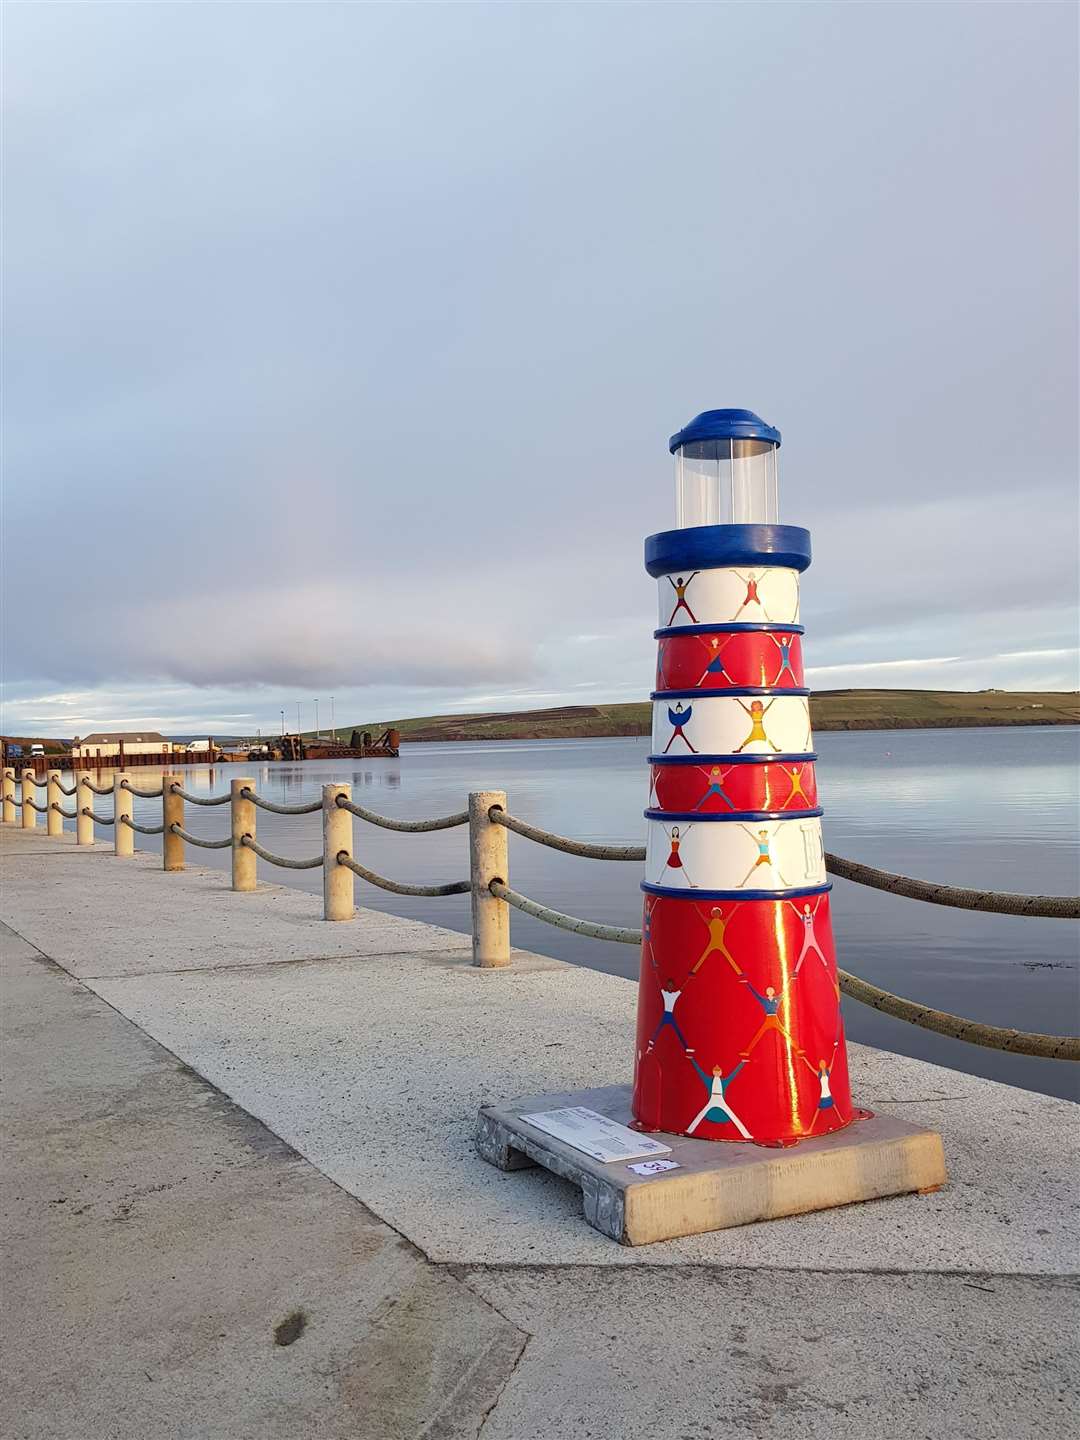 The lighthouse sculpture has been installed at St Margaret's Hope, the Orkney base of Pentland Ferries.